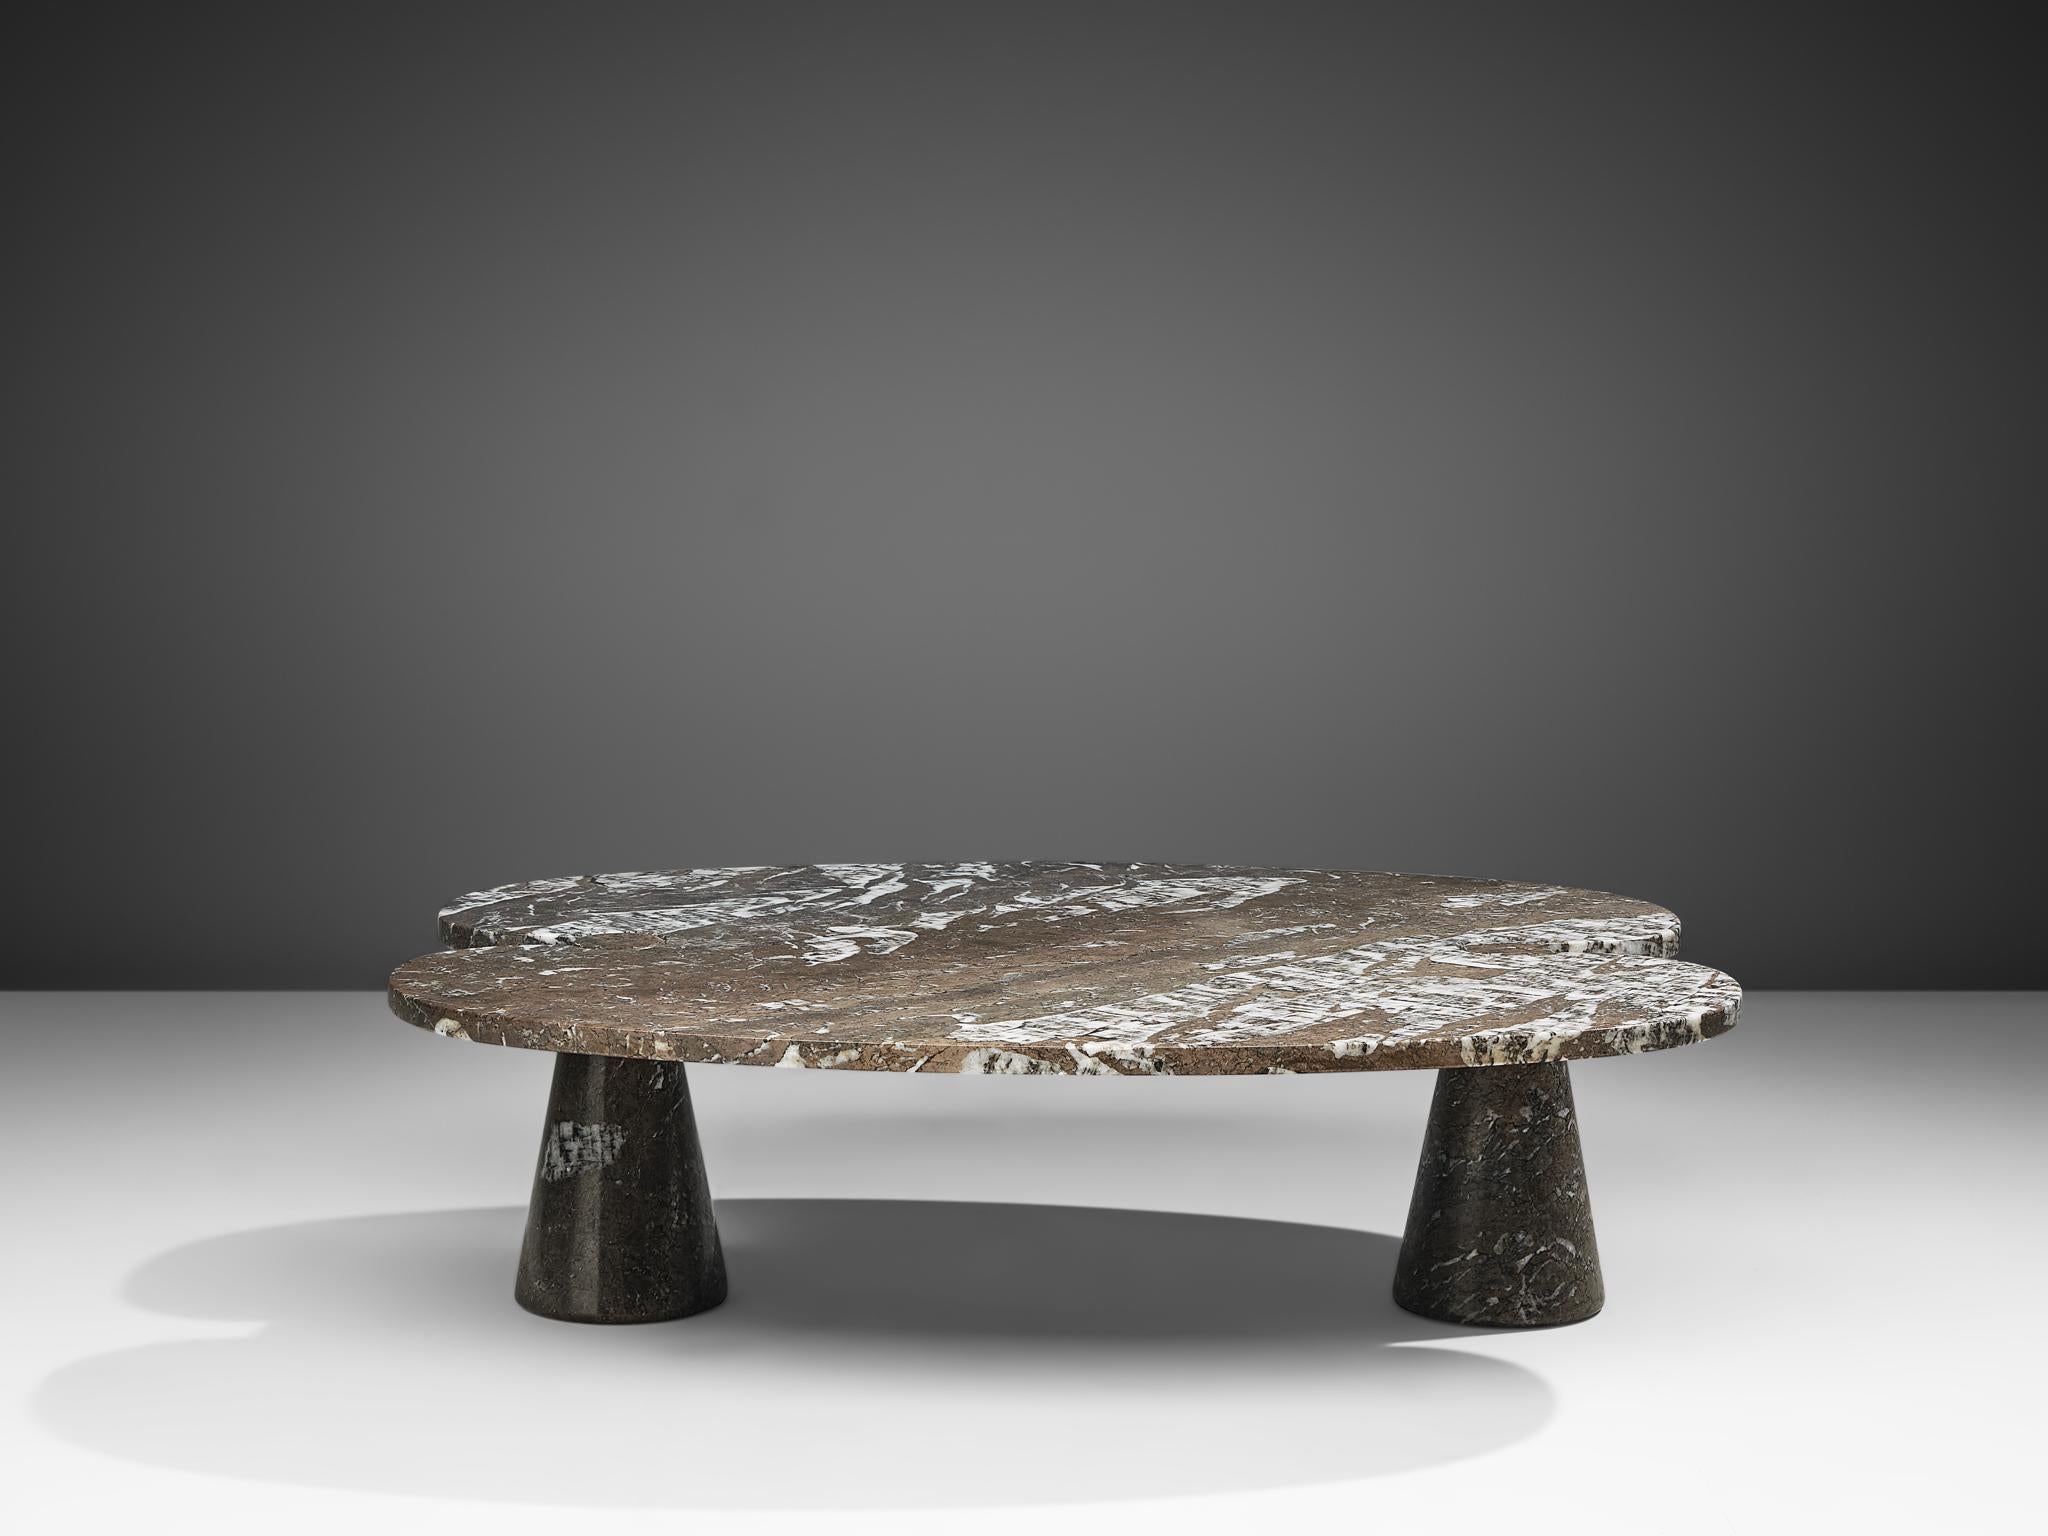 Angelo Mangiarotti for Skipper, 'Eros' coffee table, grey Mondragone marble, Italy, 1970s. 

This sculptural table by Angelo Mangiarotti is a skillful example of postmodern design. The bi-leaf like coffee table features no joints or clamps and is